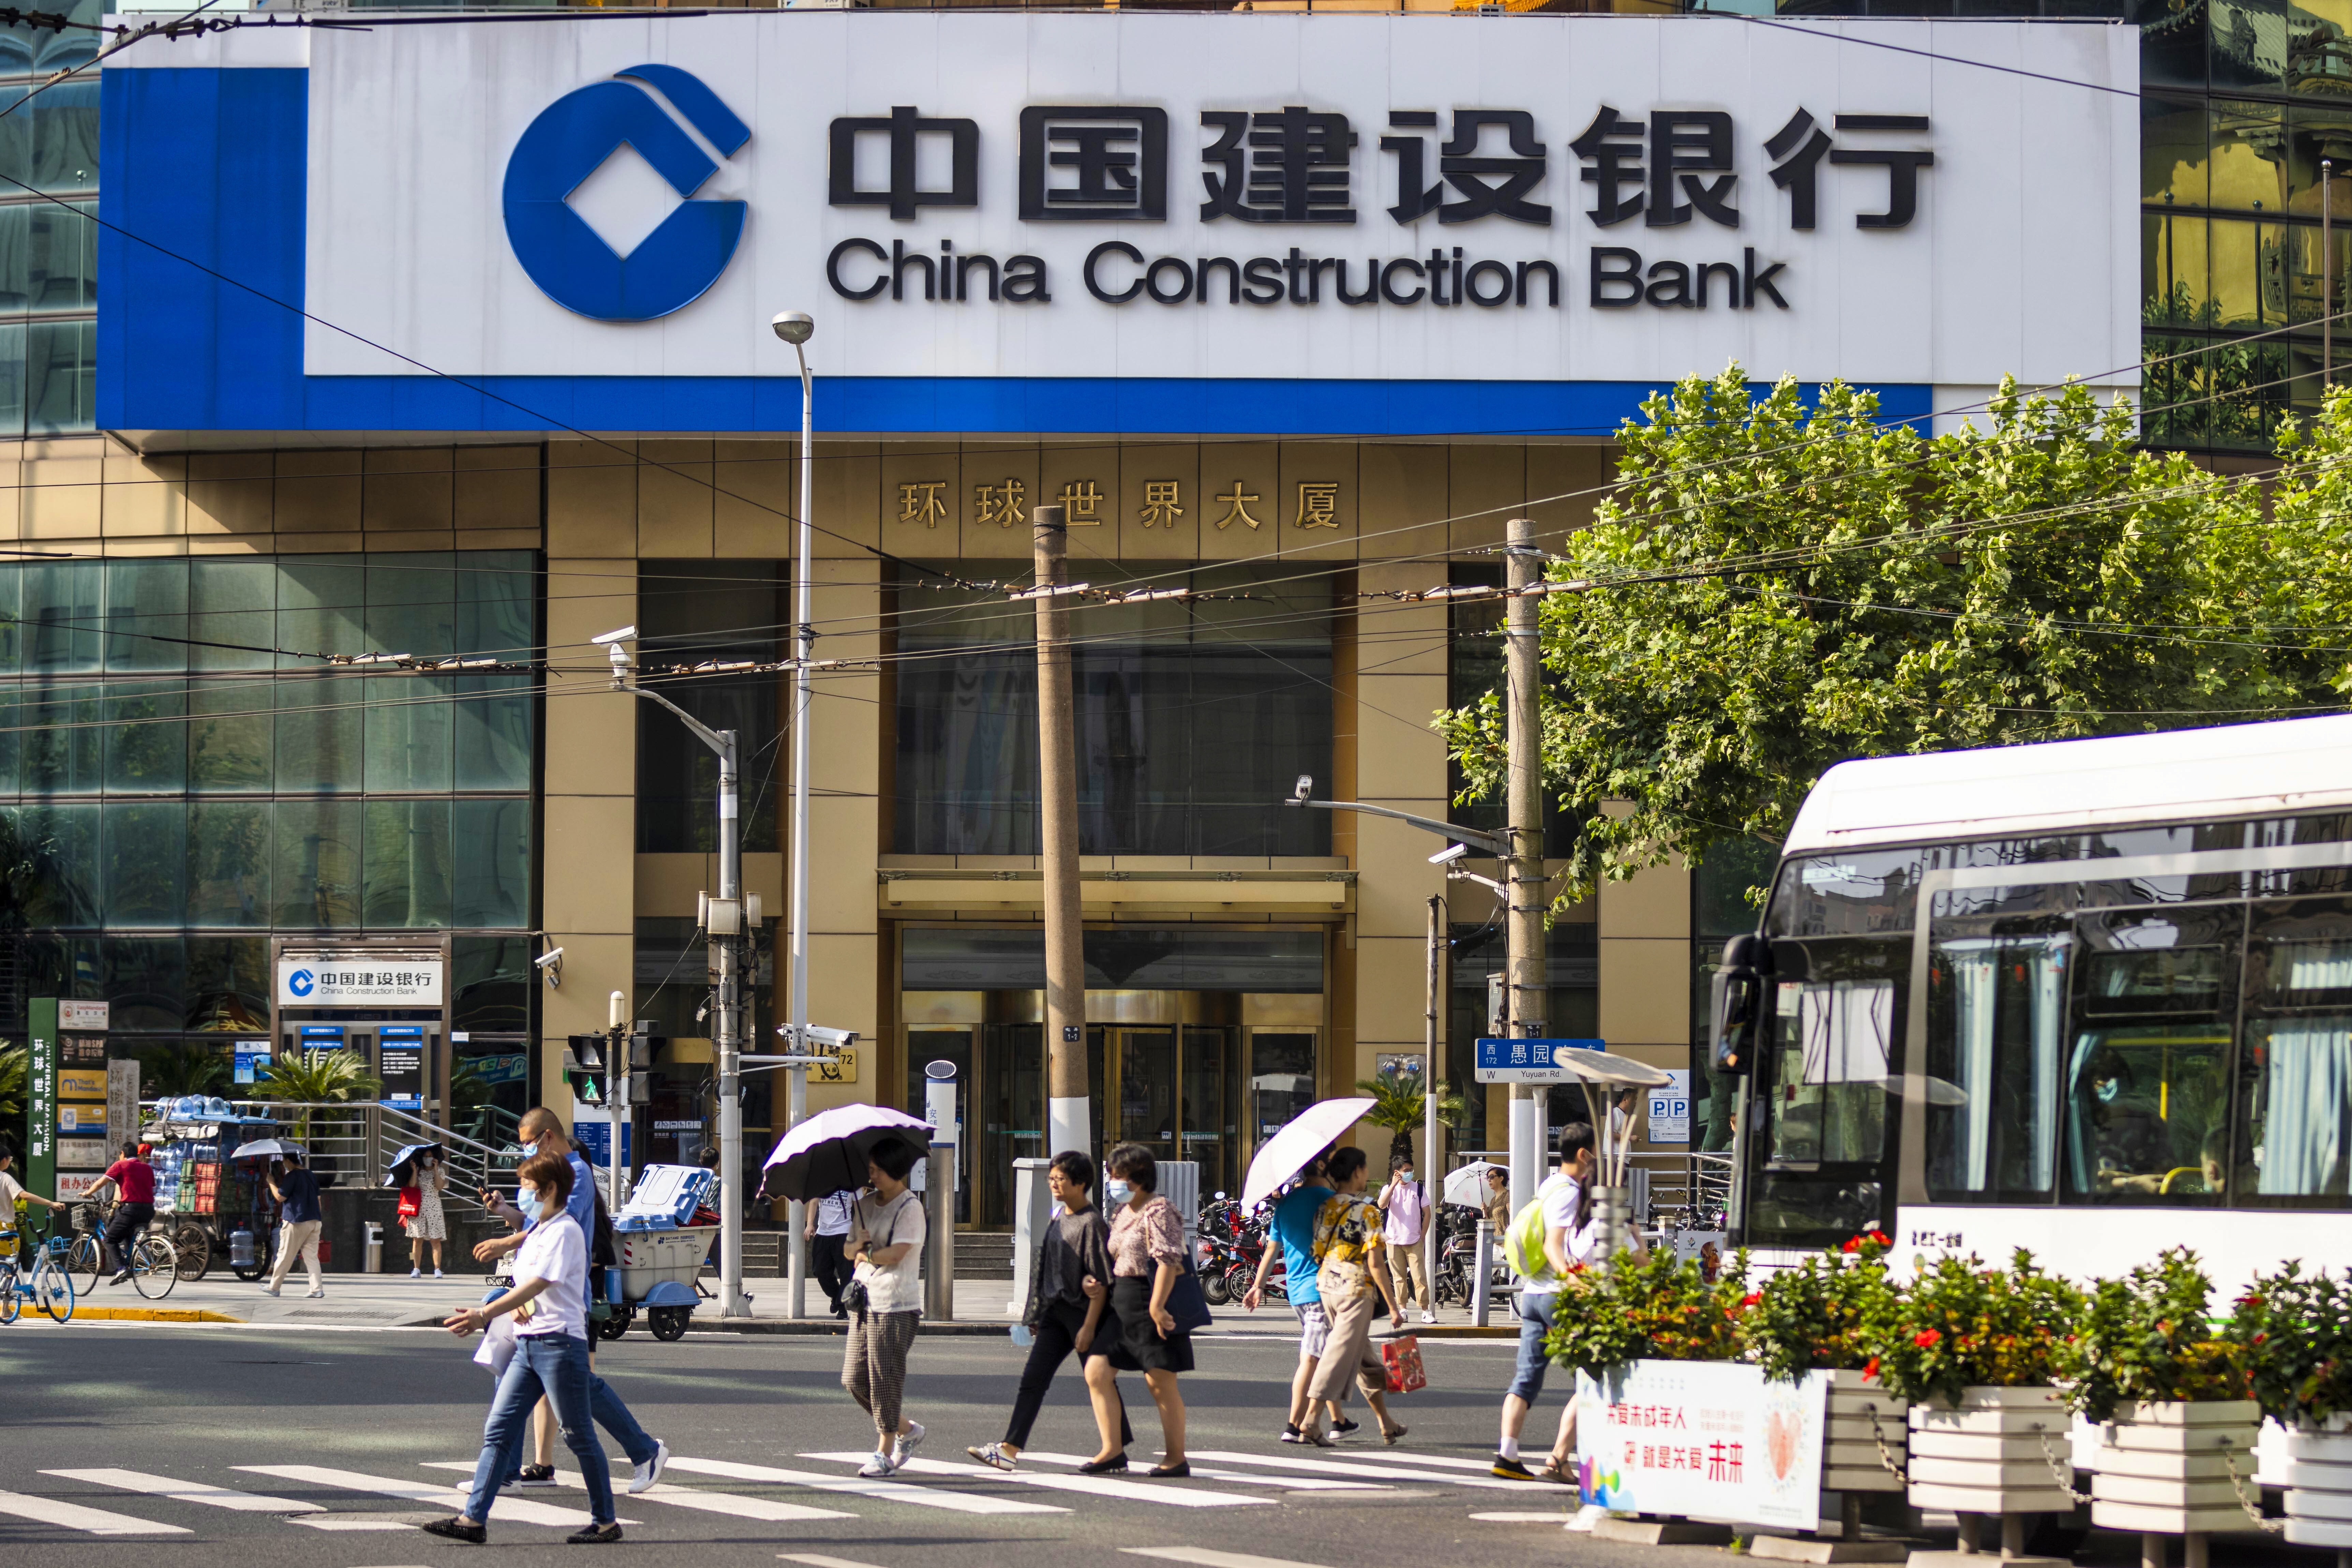 People walk in front of the China Construction Bank branch in Shanghai in August 2020. The lender has decided not to proceed with a digital bond issue on blockchain without an explanation. Photo: EPA-EFE